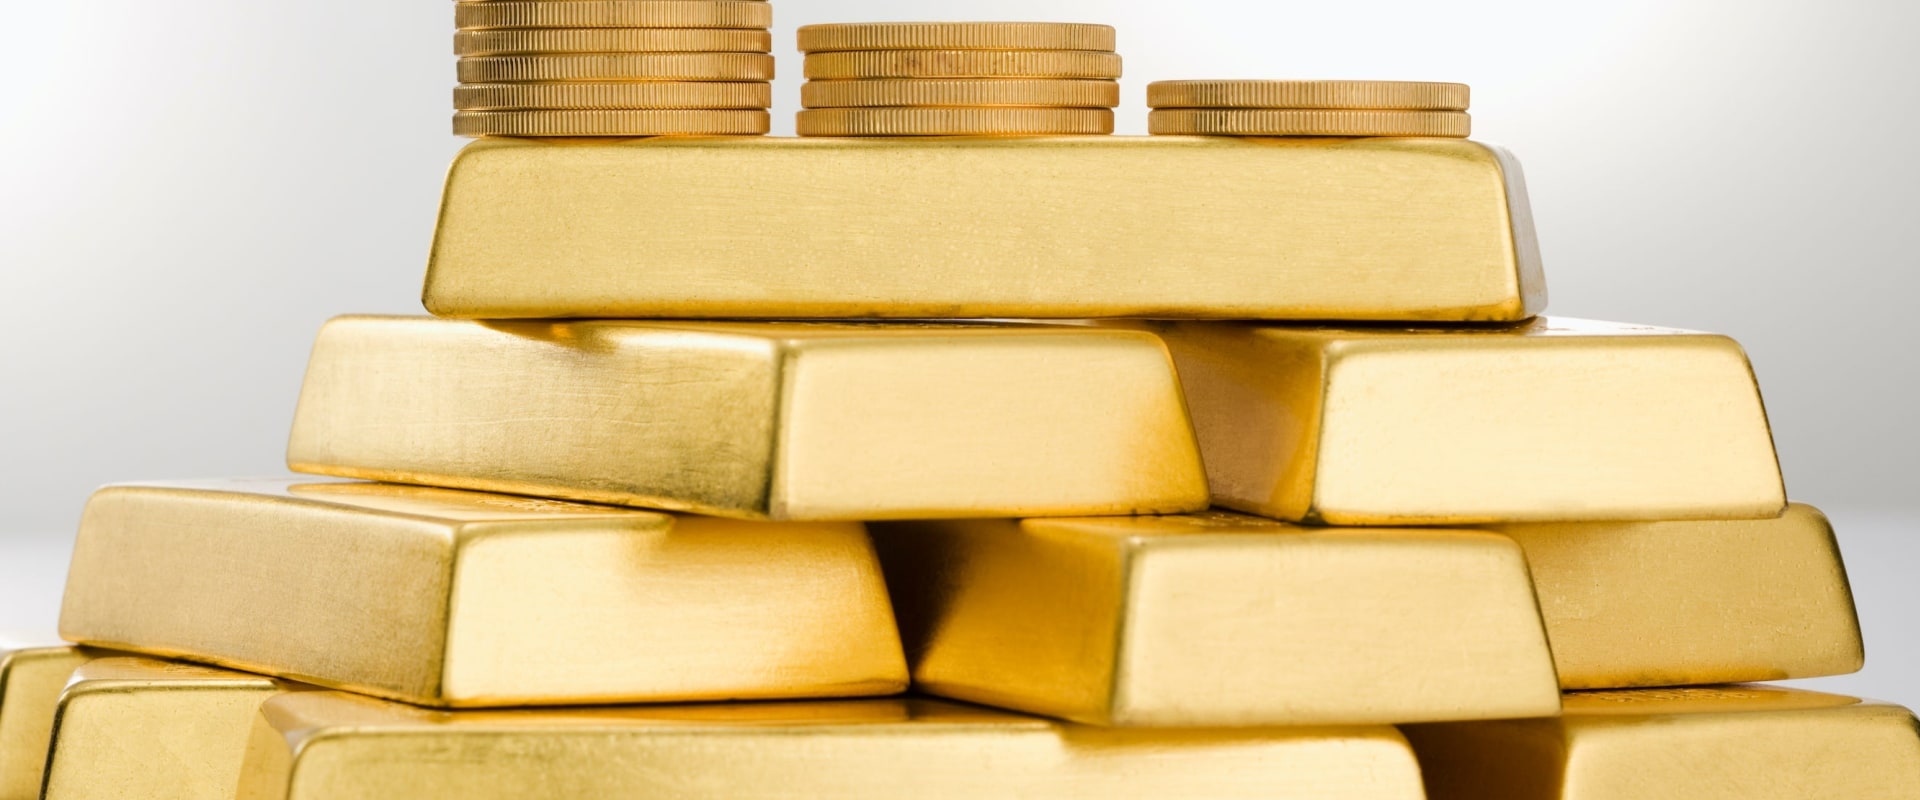 How does a gold ira work cashing out to fund retirement?